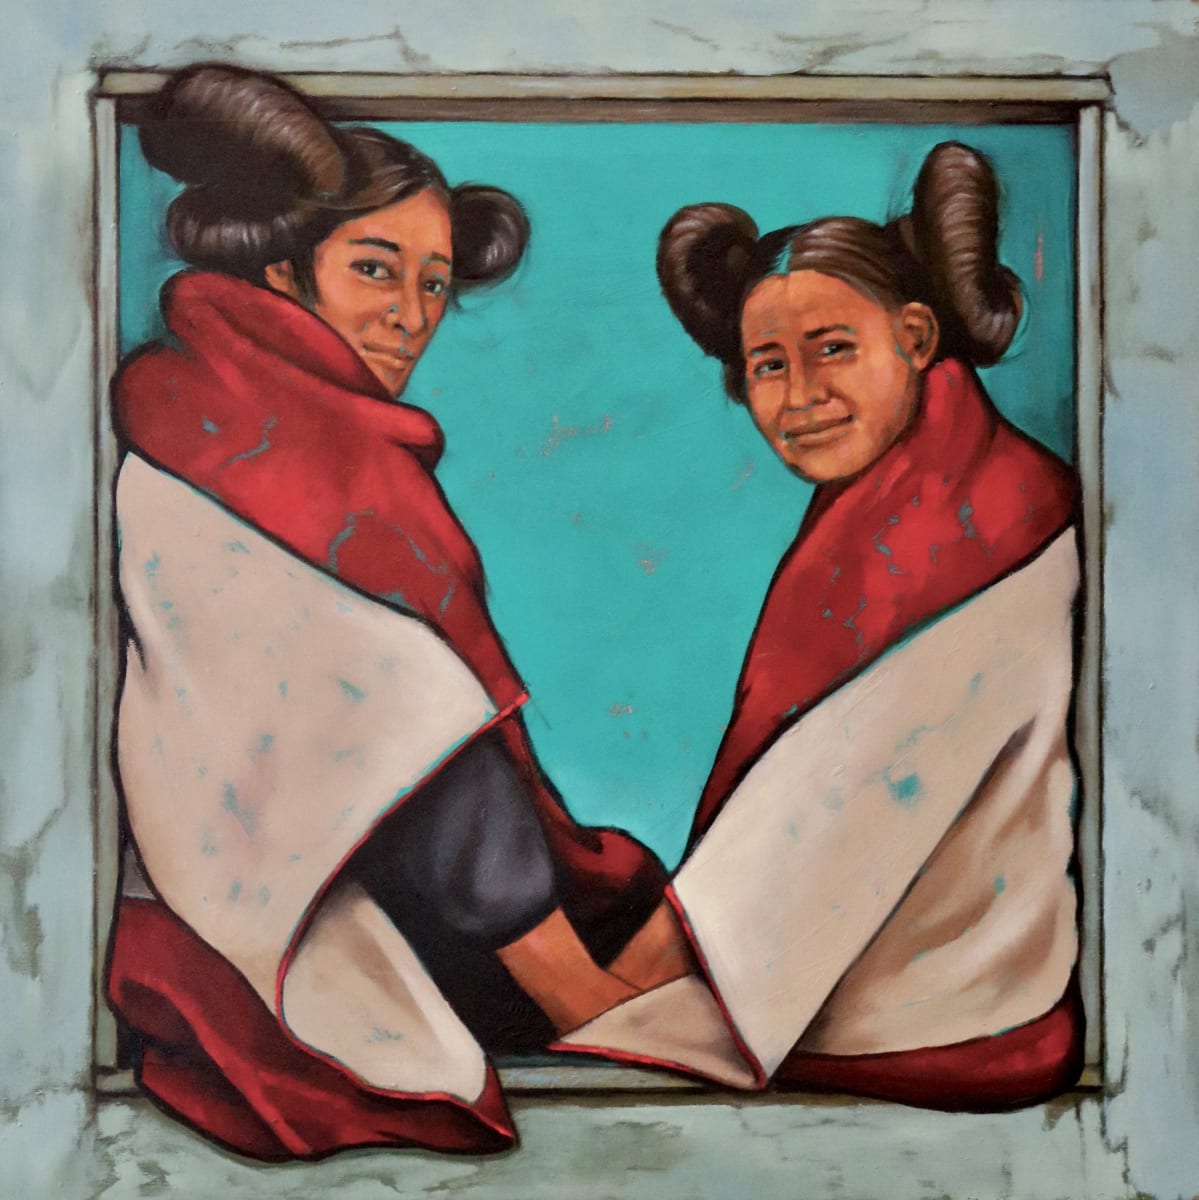 Hopi Sisters by Karen Clarkson  Image: Two sisters look out their window together - from a photo by Edward Curtis in the late 1800’s